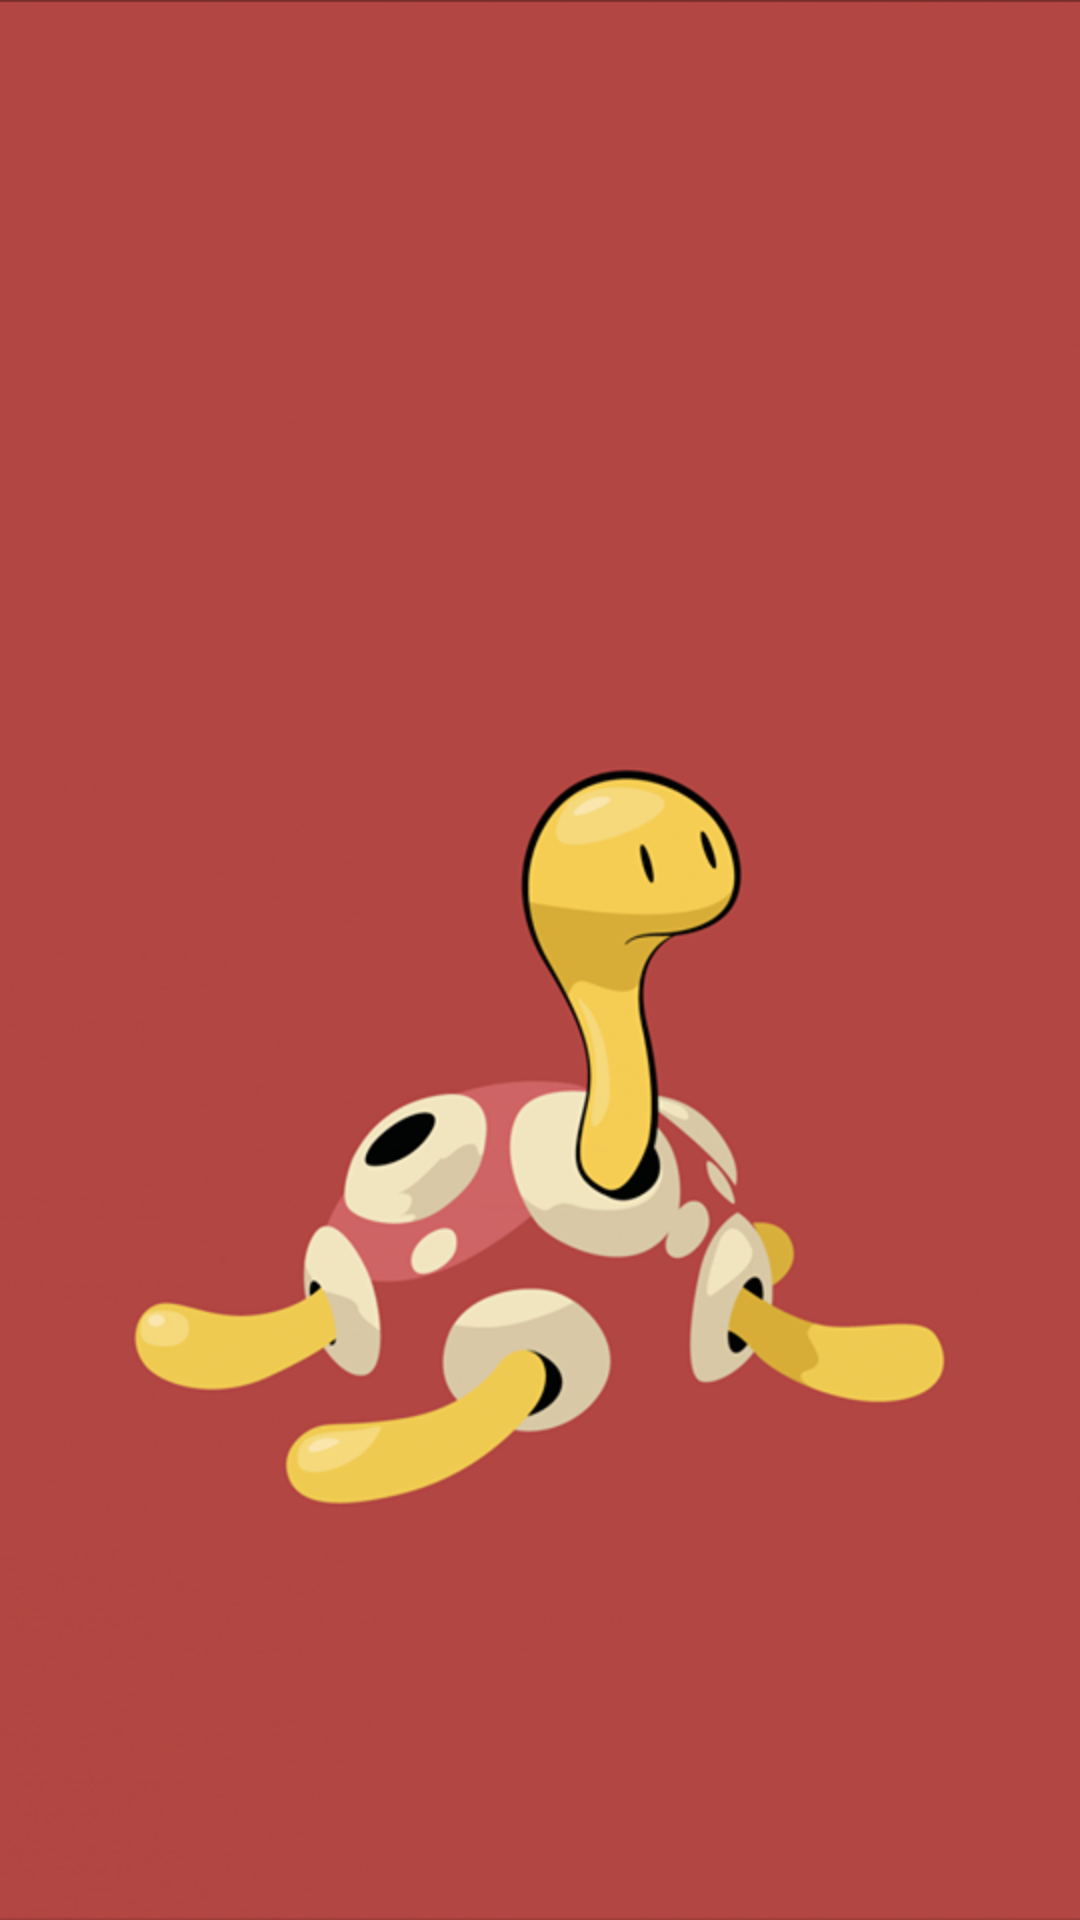 Shuckle – Tap to see more of the cutest cartoon characters …